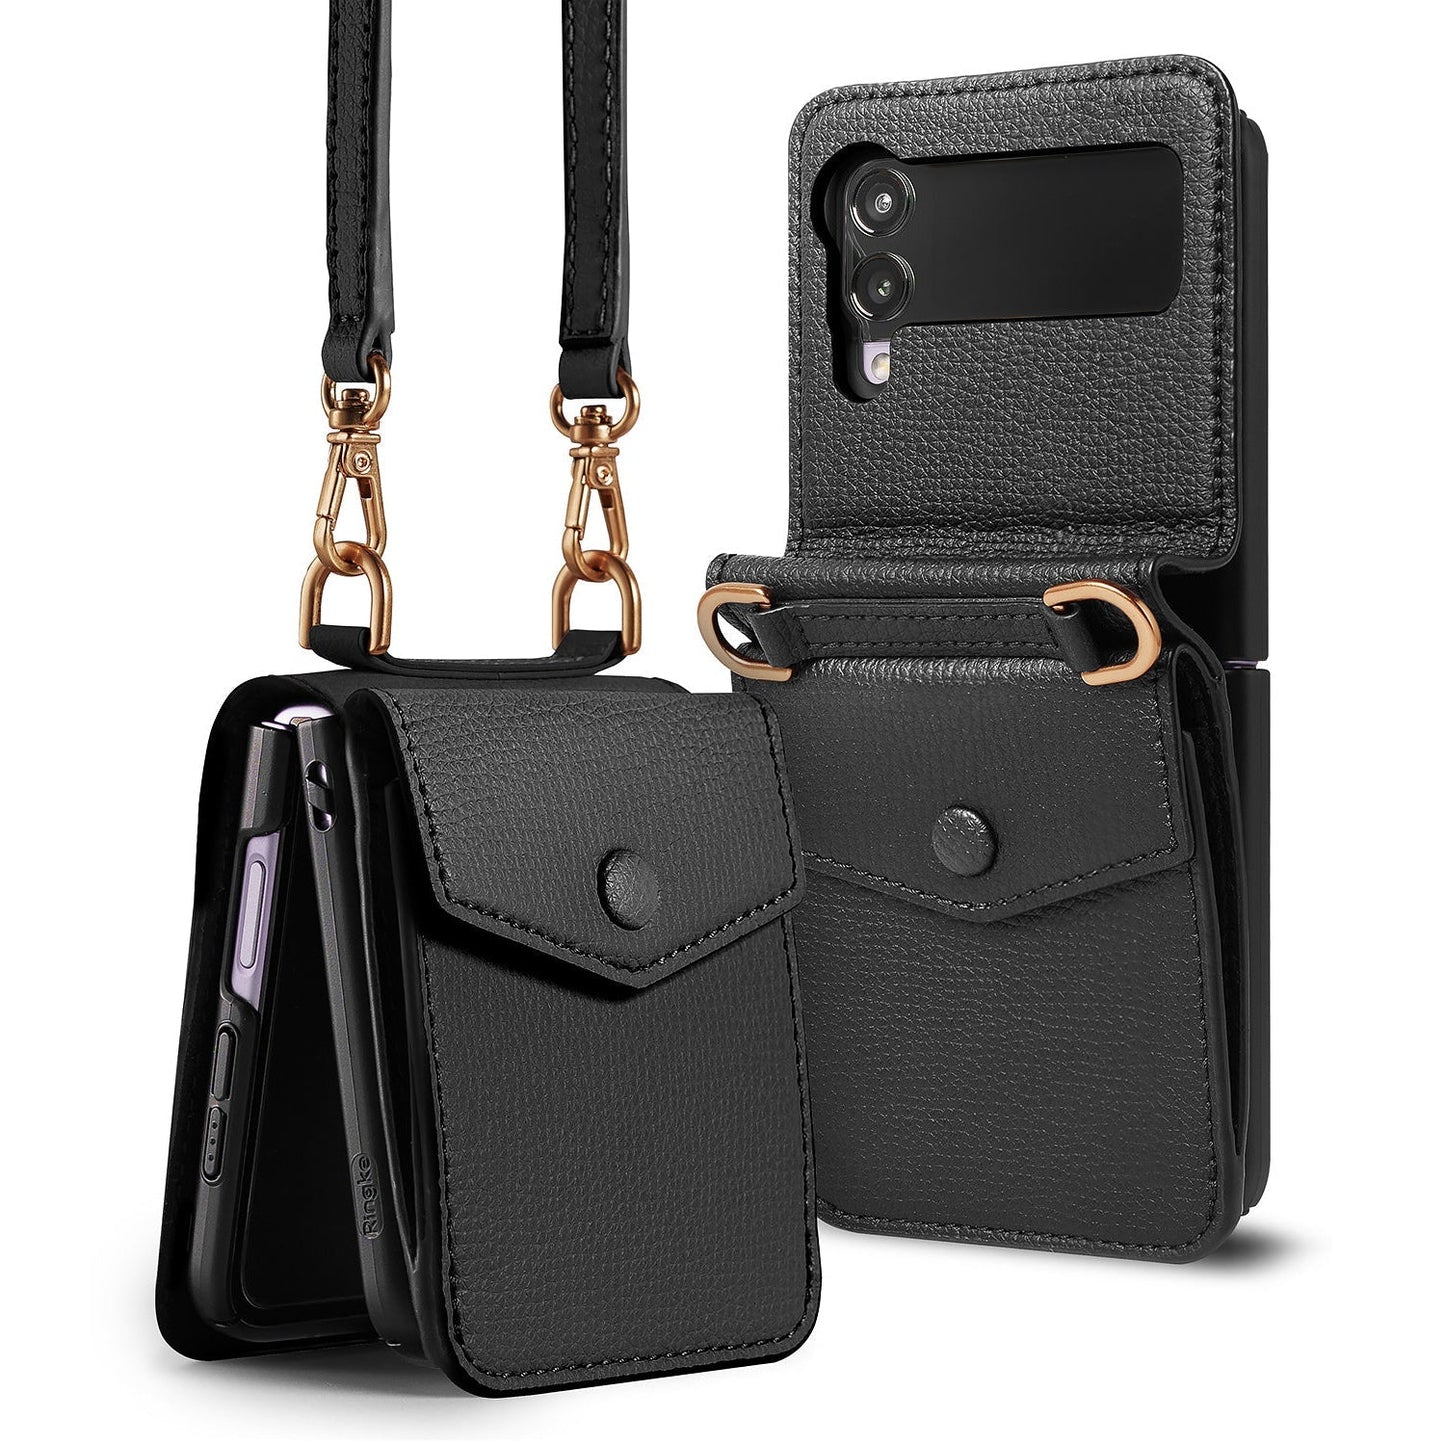 Shop and buy Ringke Folio Signature Card Pocket for Samsung Galaxy Z Flip 3 5G (2021) mini crossbody-style| Casefactorie® online with great deals and sales prices with fast and safe shipping. Casefactorie is the largest Singapore official authorised retailer for the largest collection of mobile premium accessories.